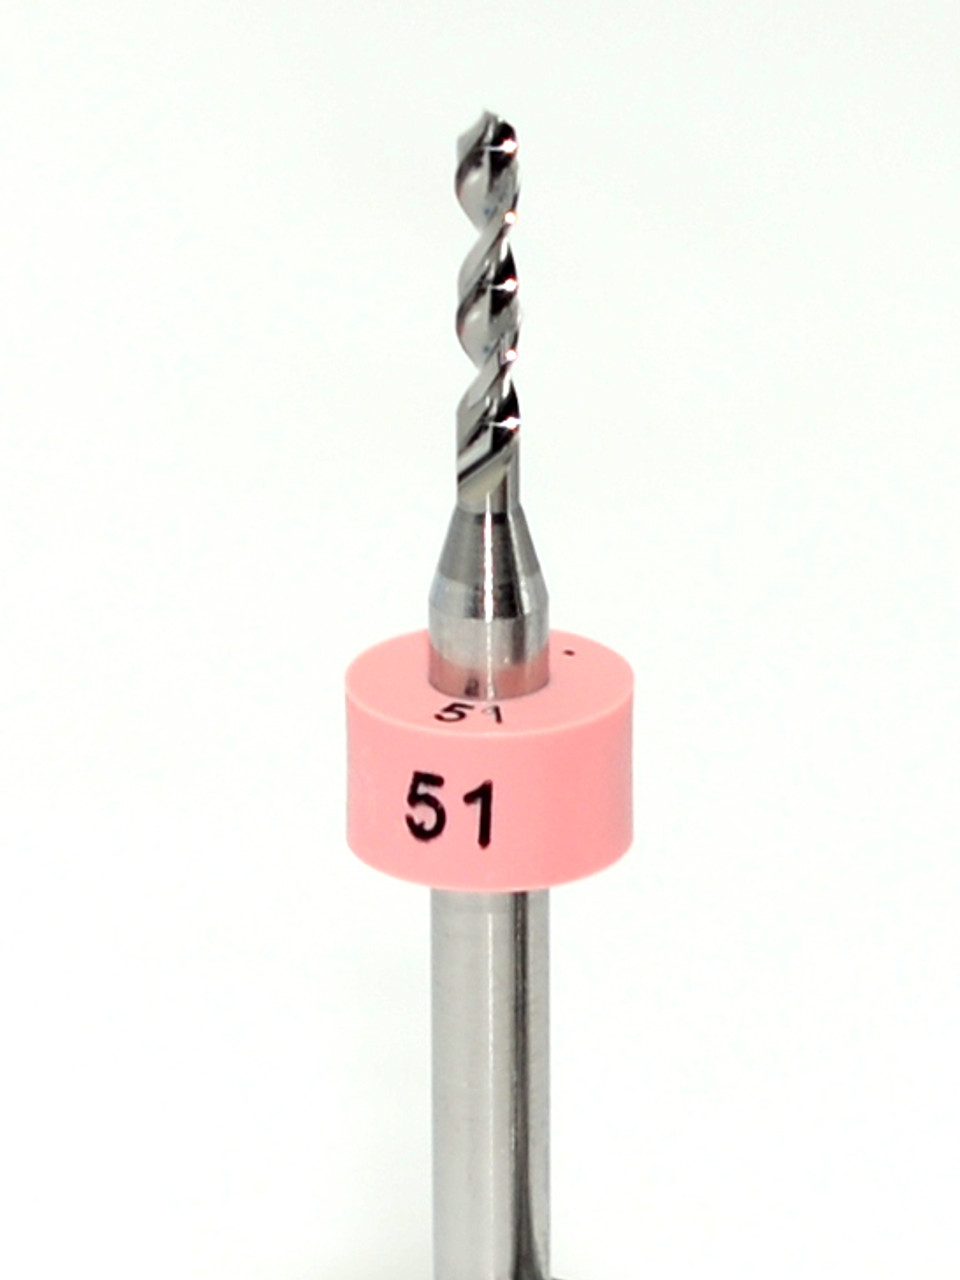 Drill bit Size: 1.71mm also #51  Flute length: sizes .50 to .65mm 8.90mm, sizes .70 to 2.50mm 10.50mm Drill Point 135Â°, Shank .125â€ / 3.18mm,Overall length 38mm /1.50â€ All bits have plastic size rings, Material Micro-Grain Carbide Grade ISO K20 / K30 Drill bits Self centering on flat surface Other surfaces use center drill first